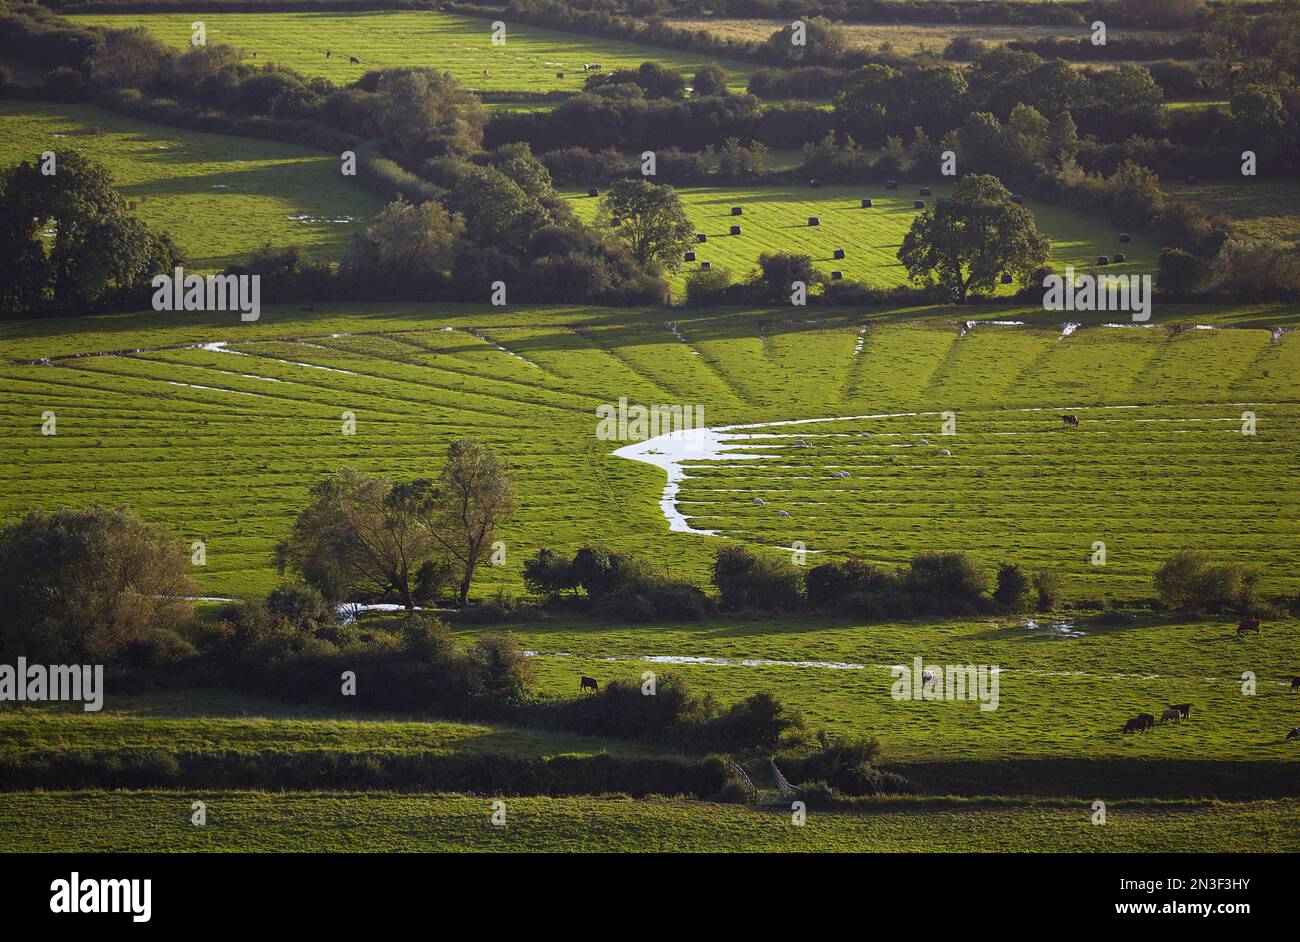 A view across the countryside of lush farmland from the slopes of Crook Peak; Somerset, England, Great Britain Stock Photo